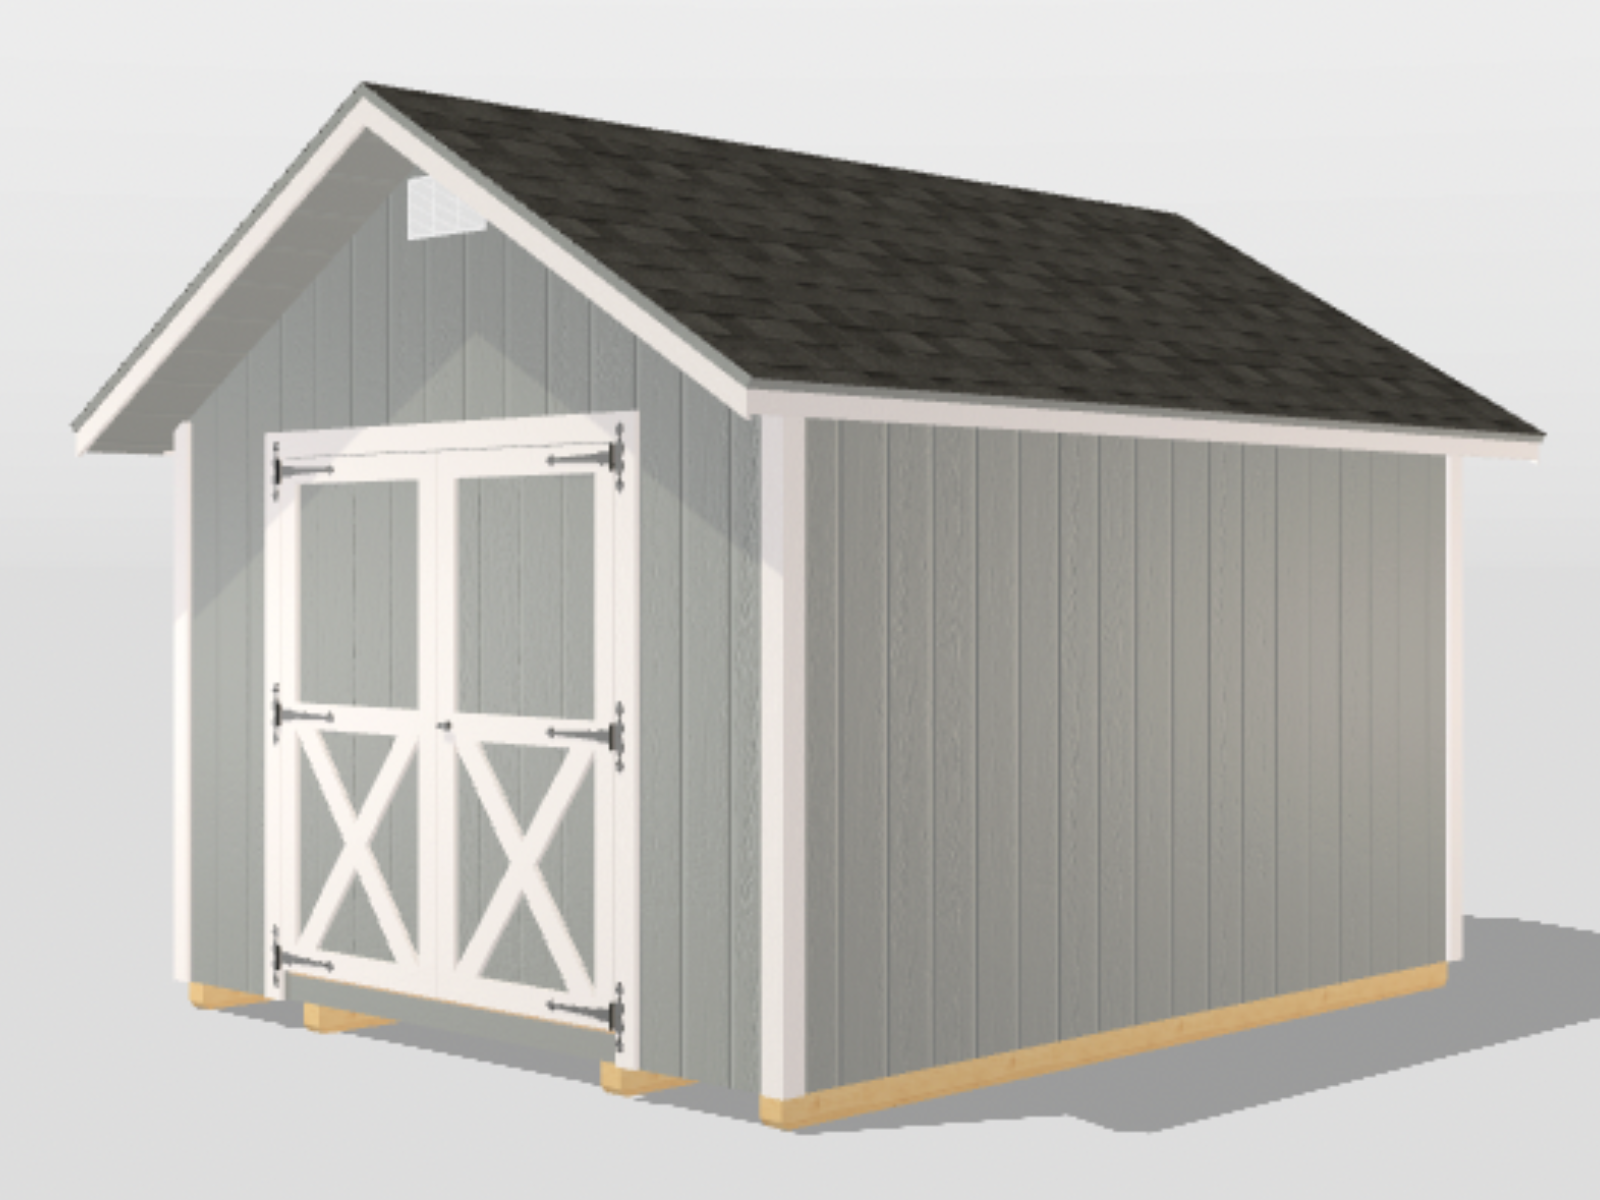 10x10 a frame shed with steep roof pitch for sale in ohio